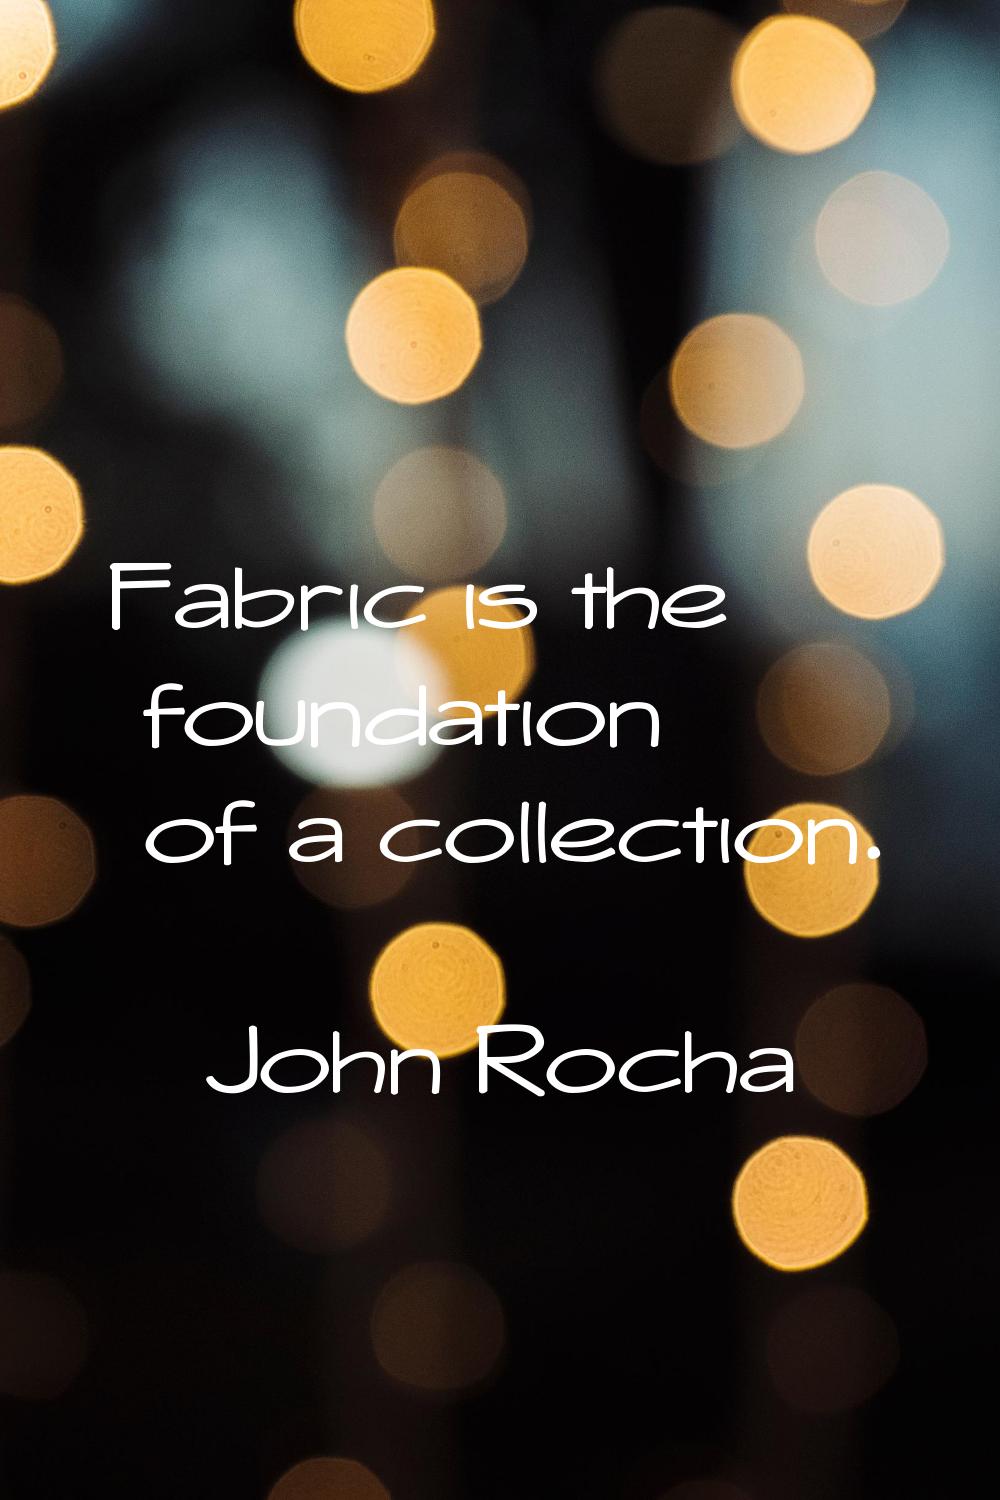 Fabric is the foundation of a collection.